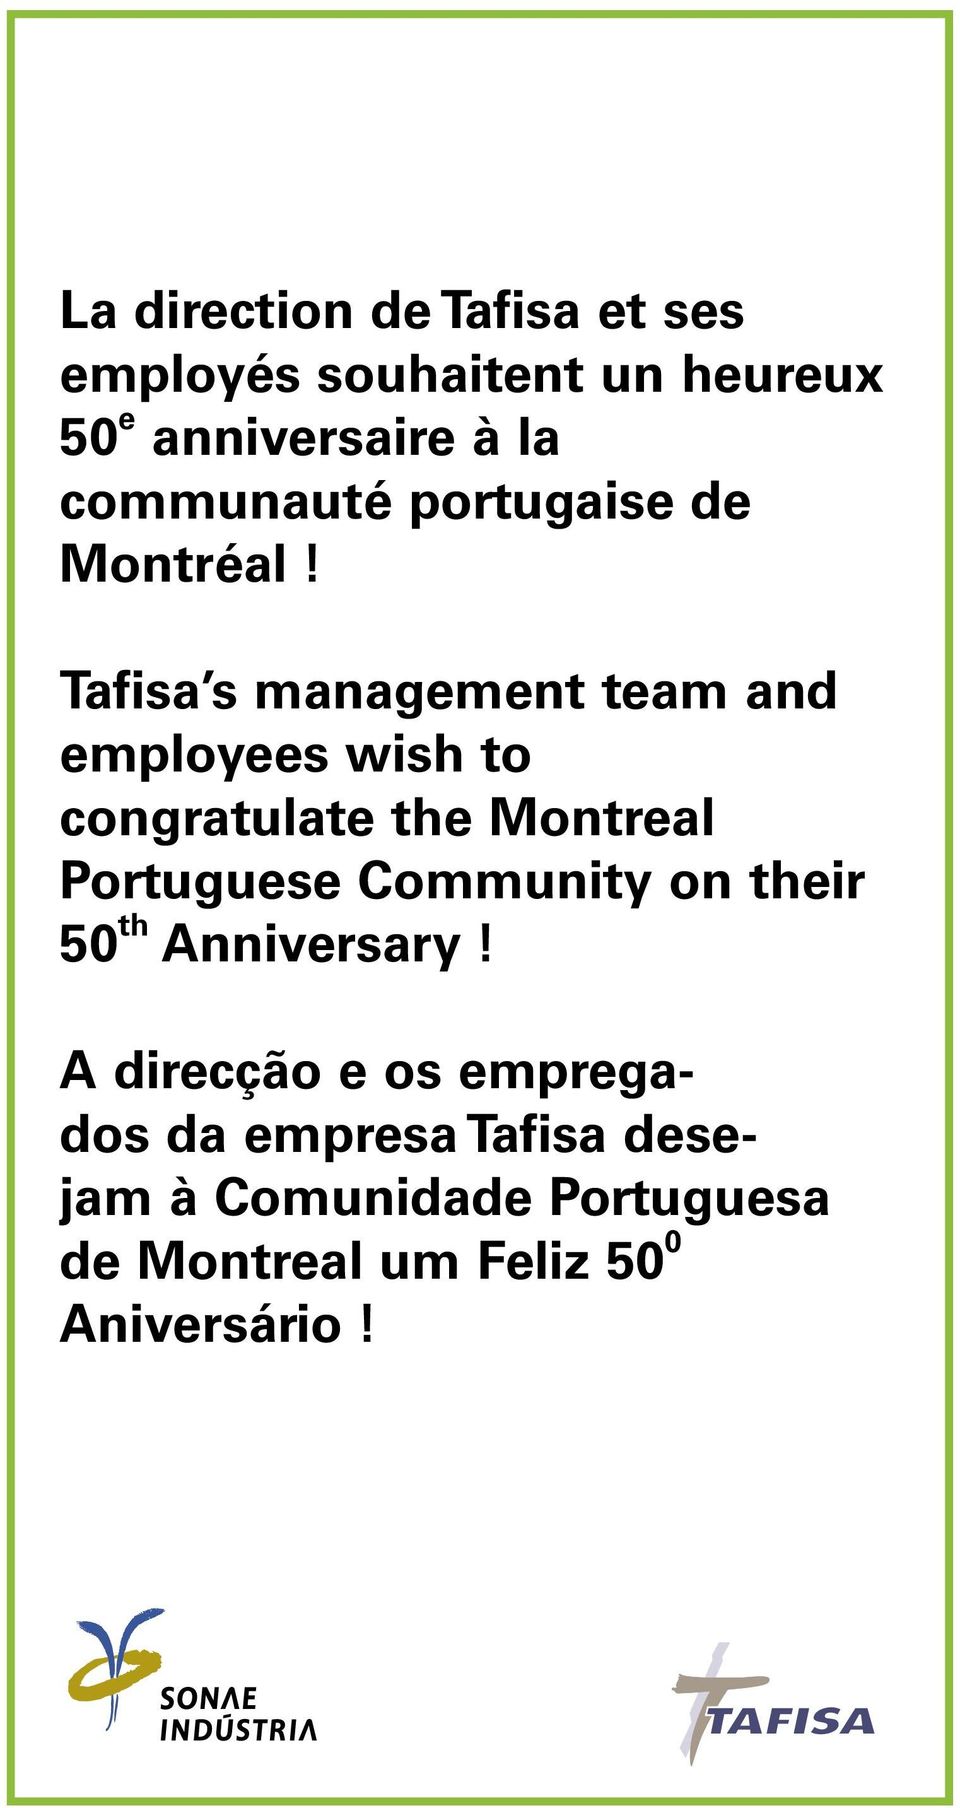 Tafisa s management team and employees wish to congratulate the Montreal Portuguese